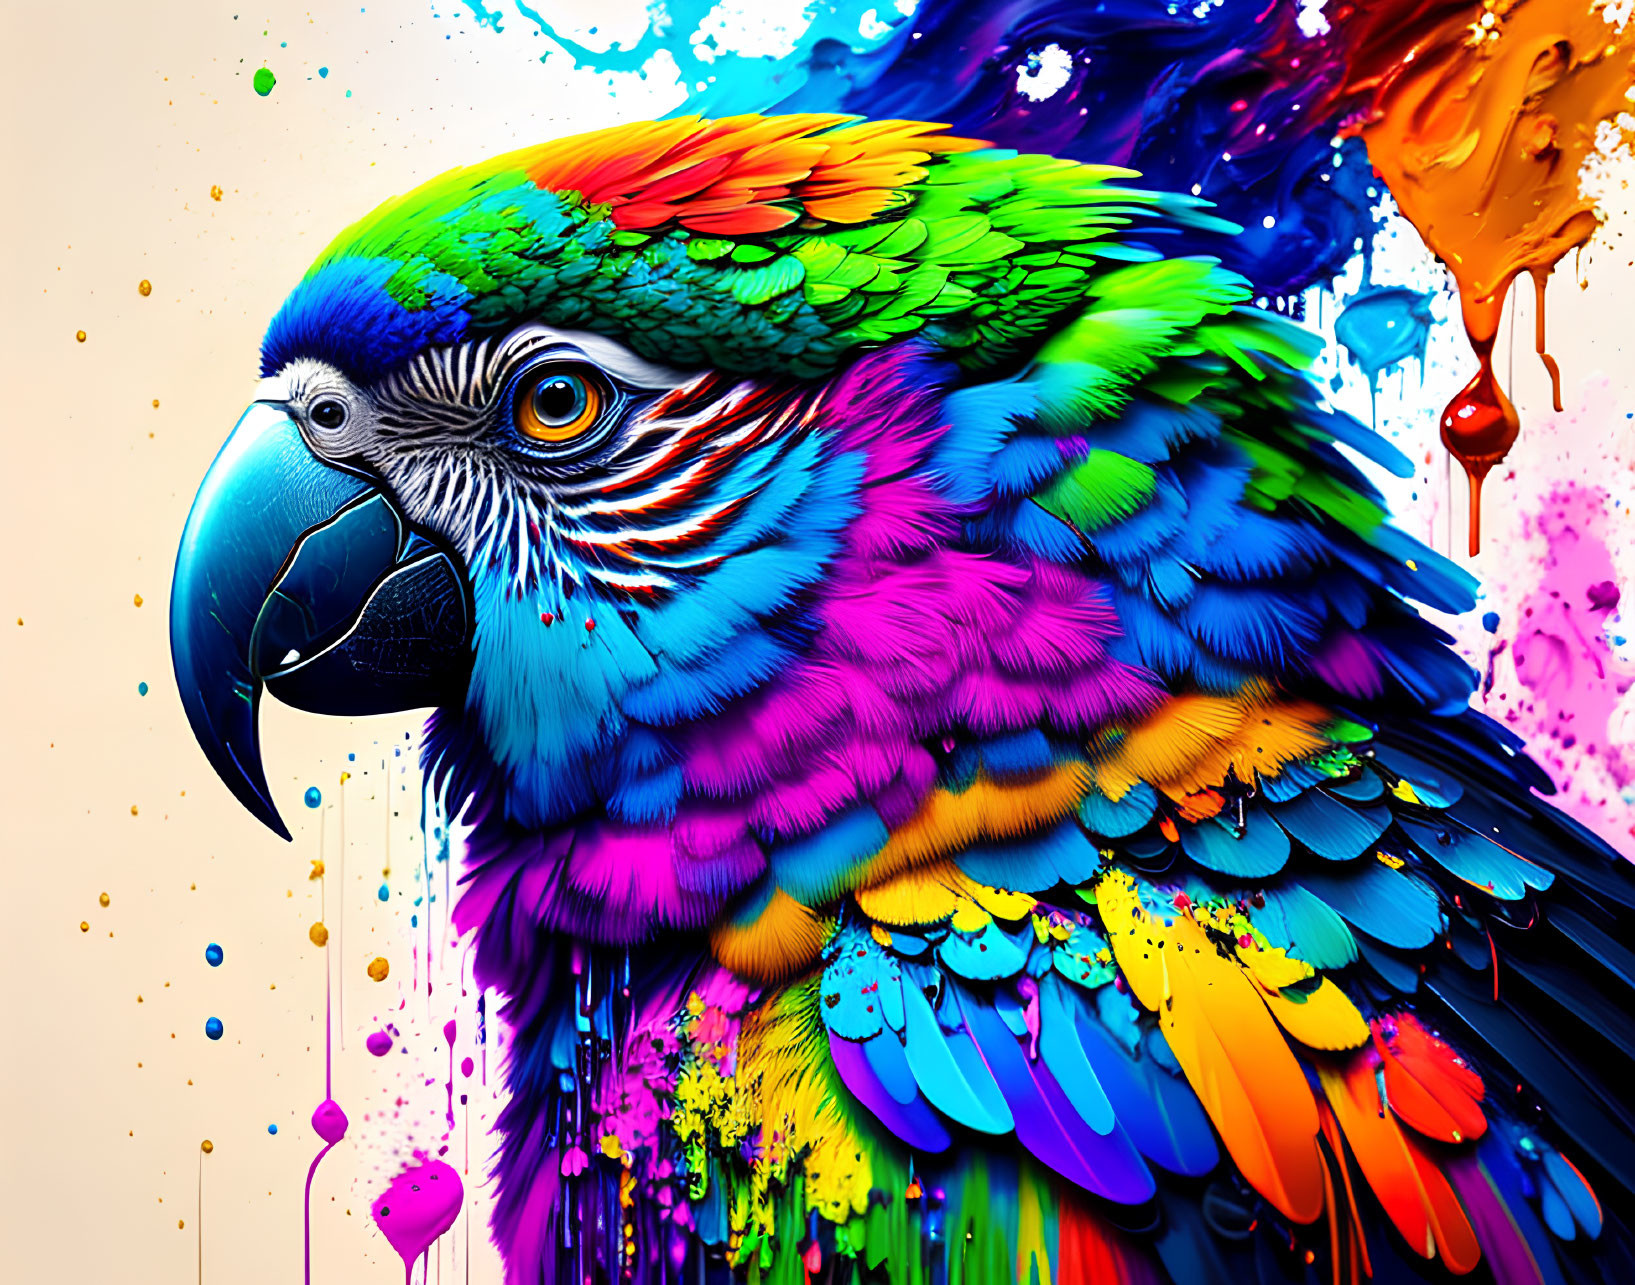 Colorful Parrot Artwork with Dripping Paint Effect